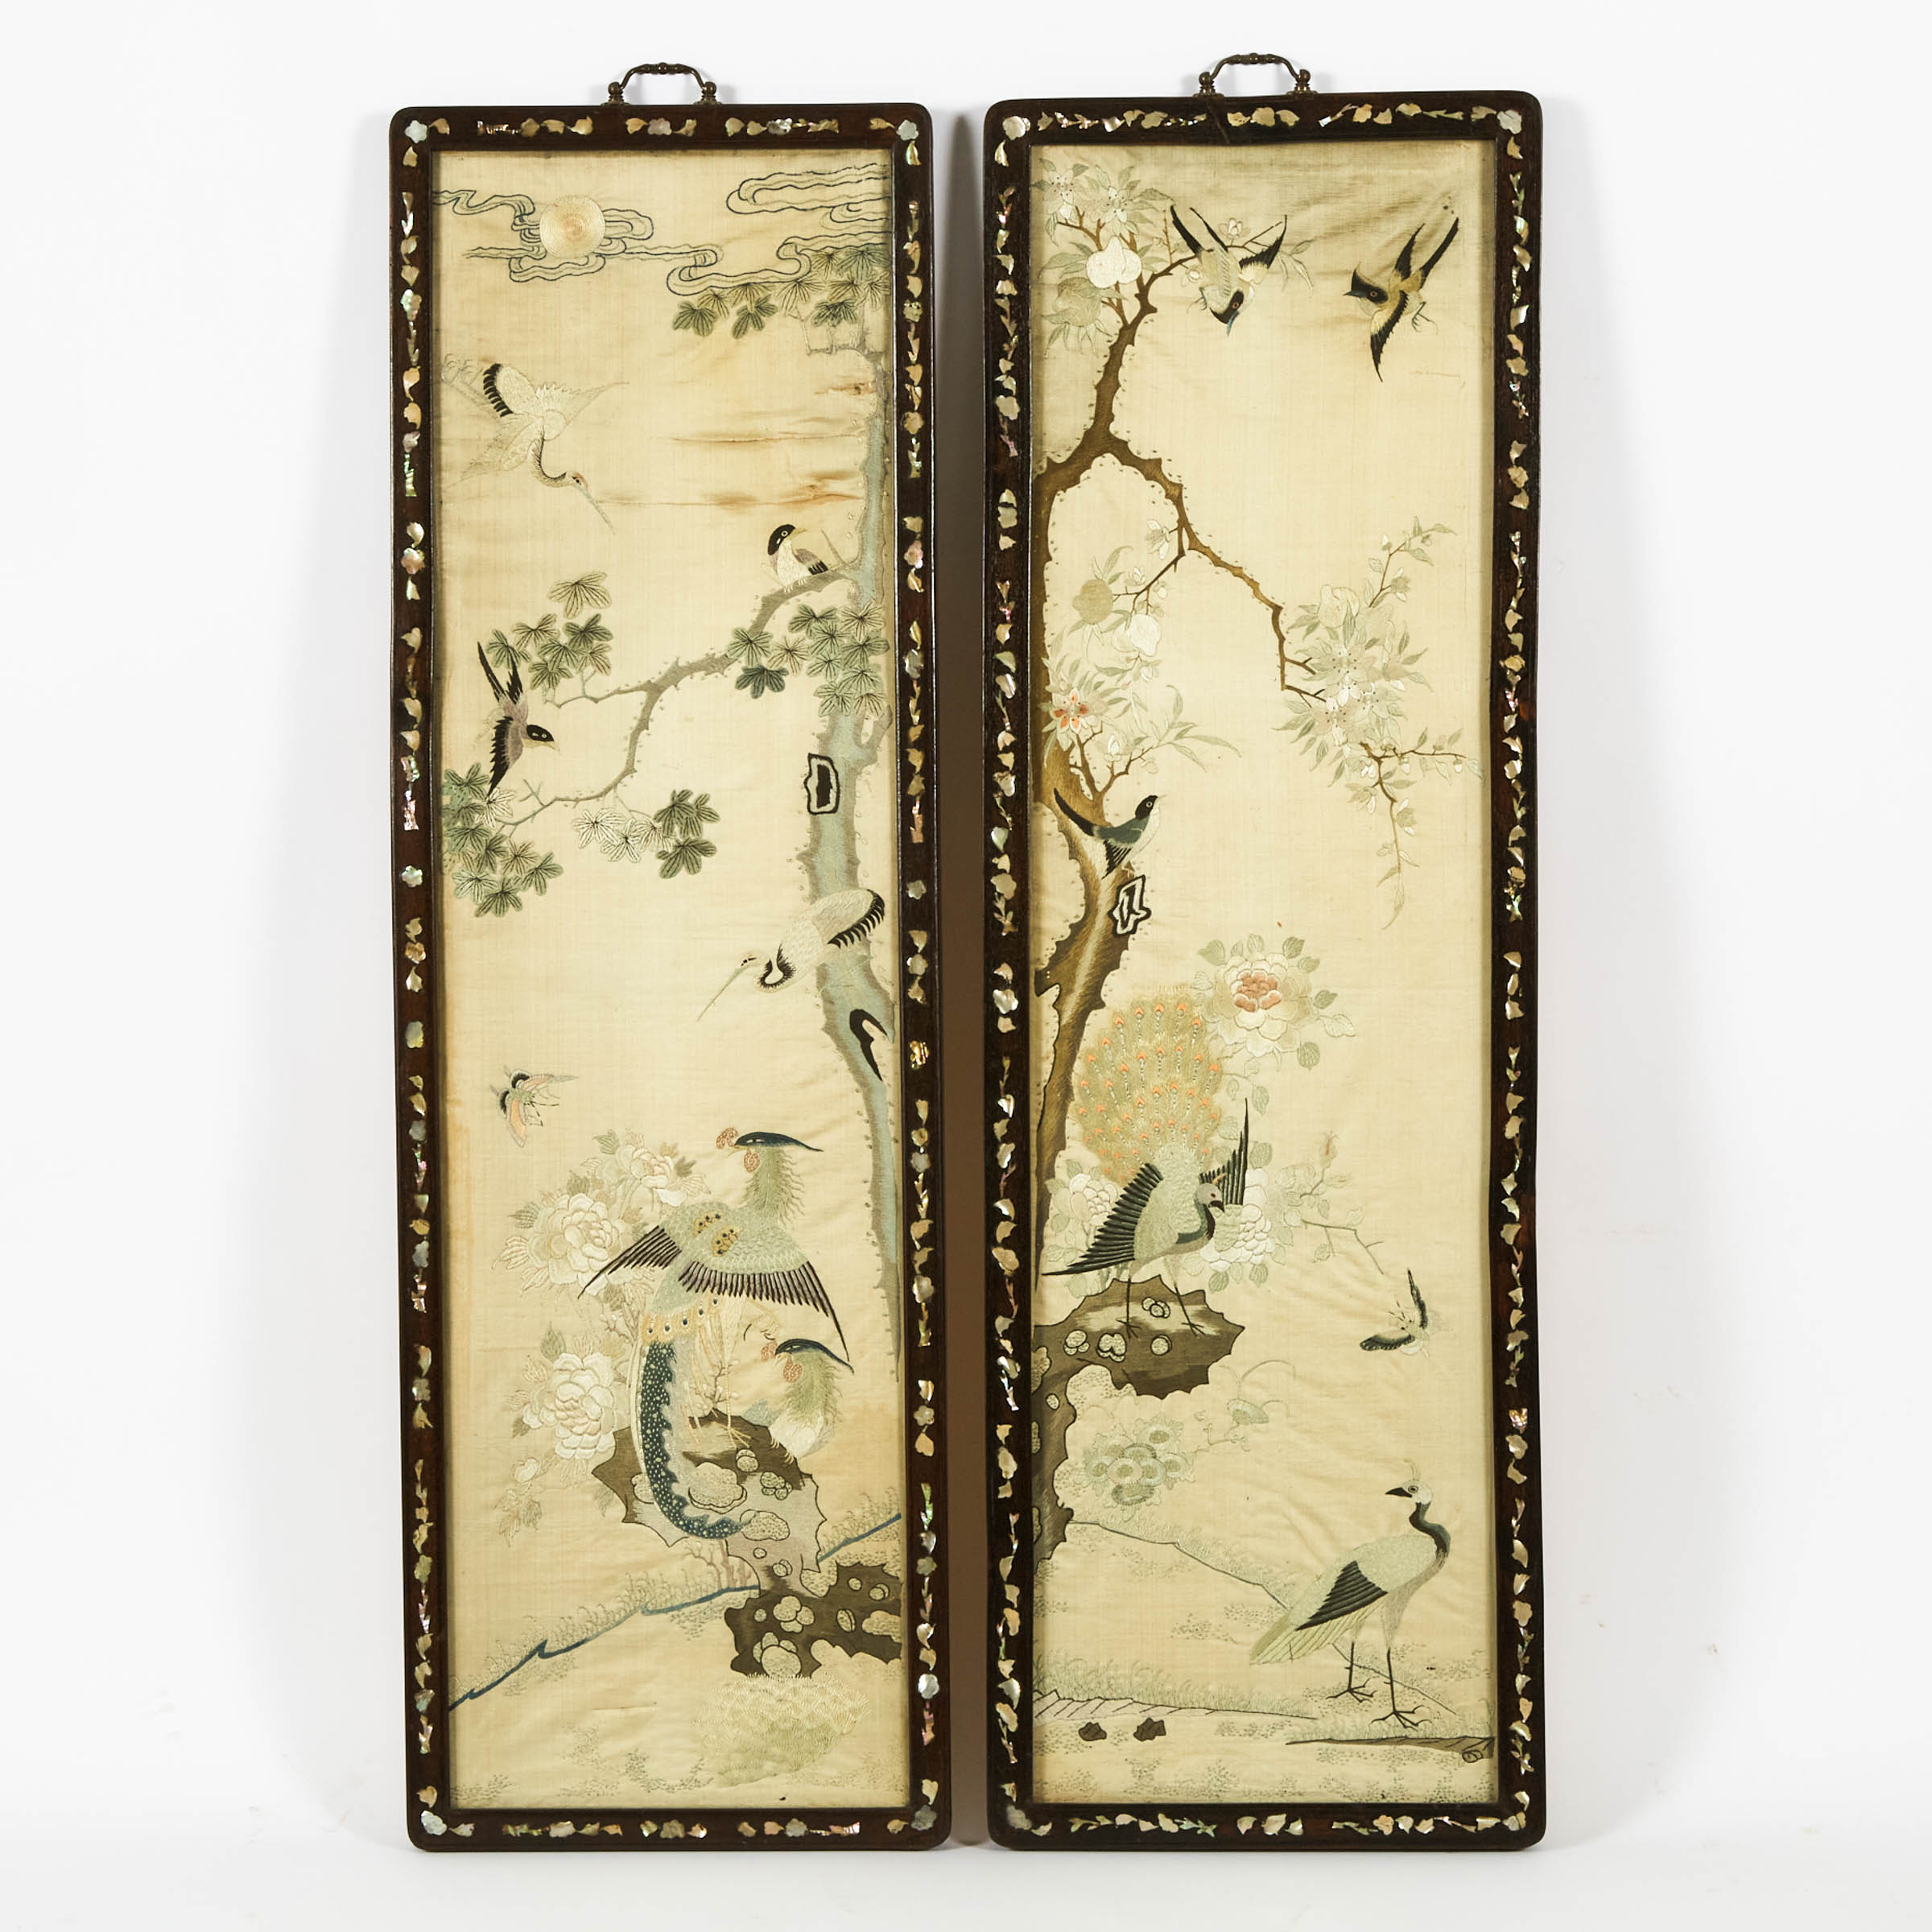 A Pair of Silk Embroidered 'Birds of Paradise' Panels With Mother-of-Pearl Inlaid Frames, Late Qing Dynasty